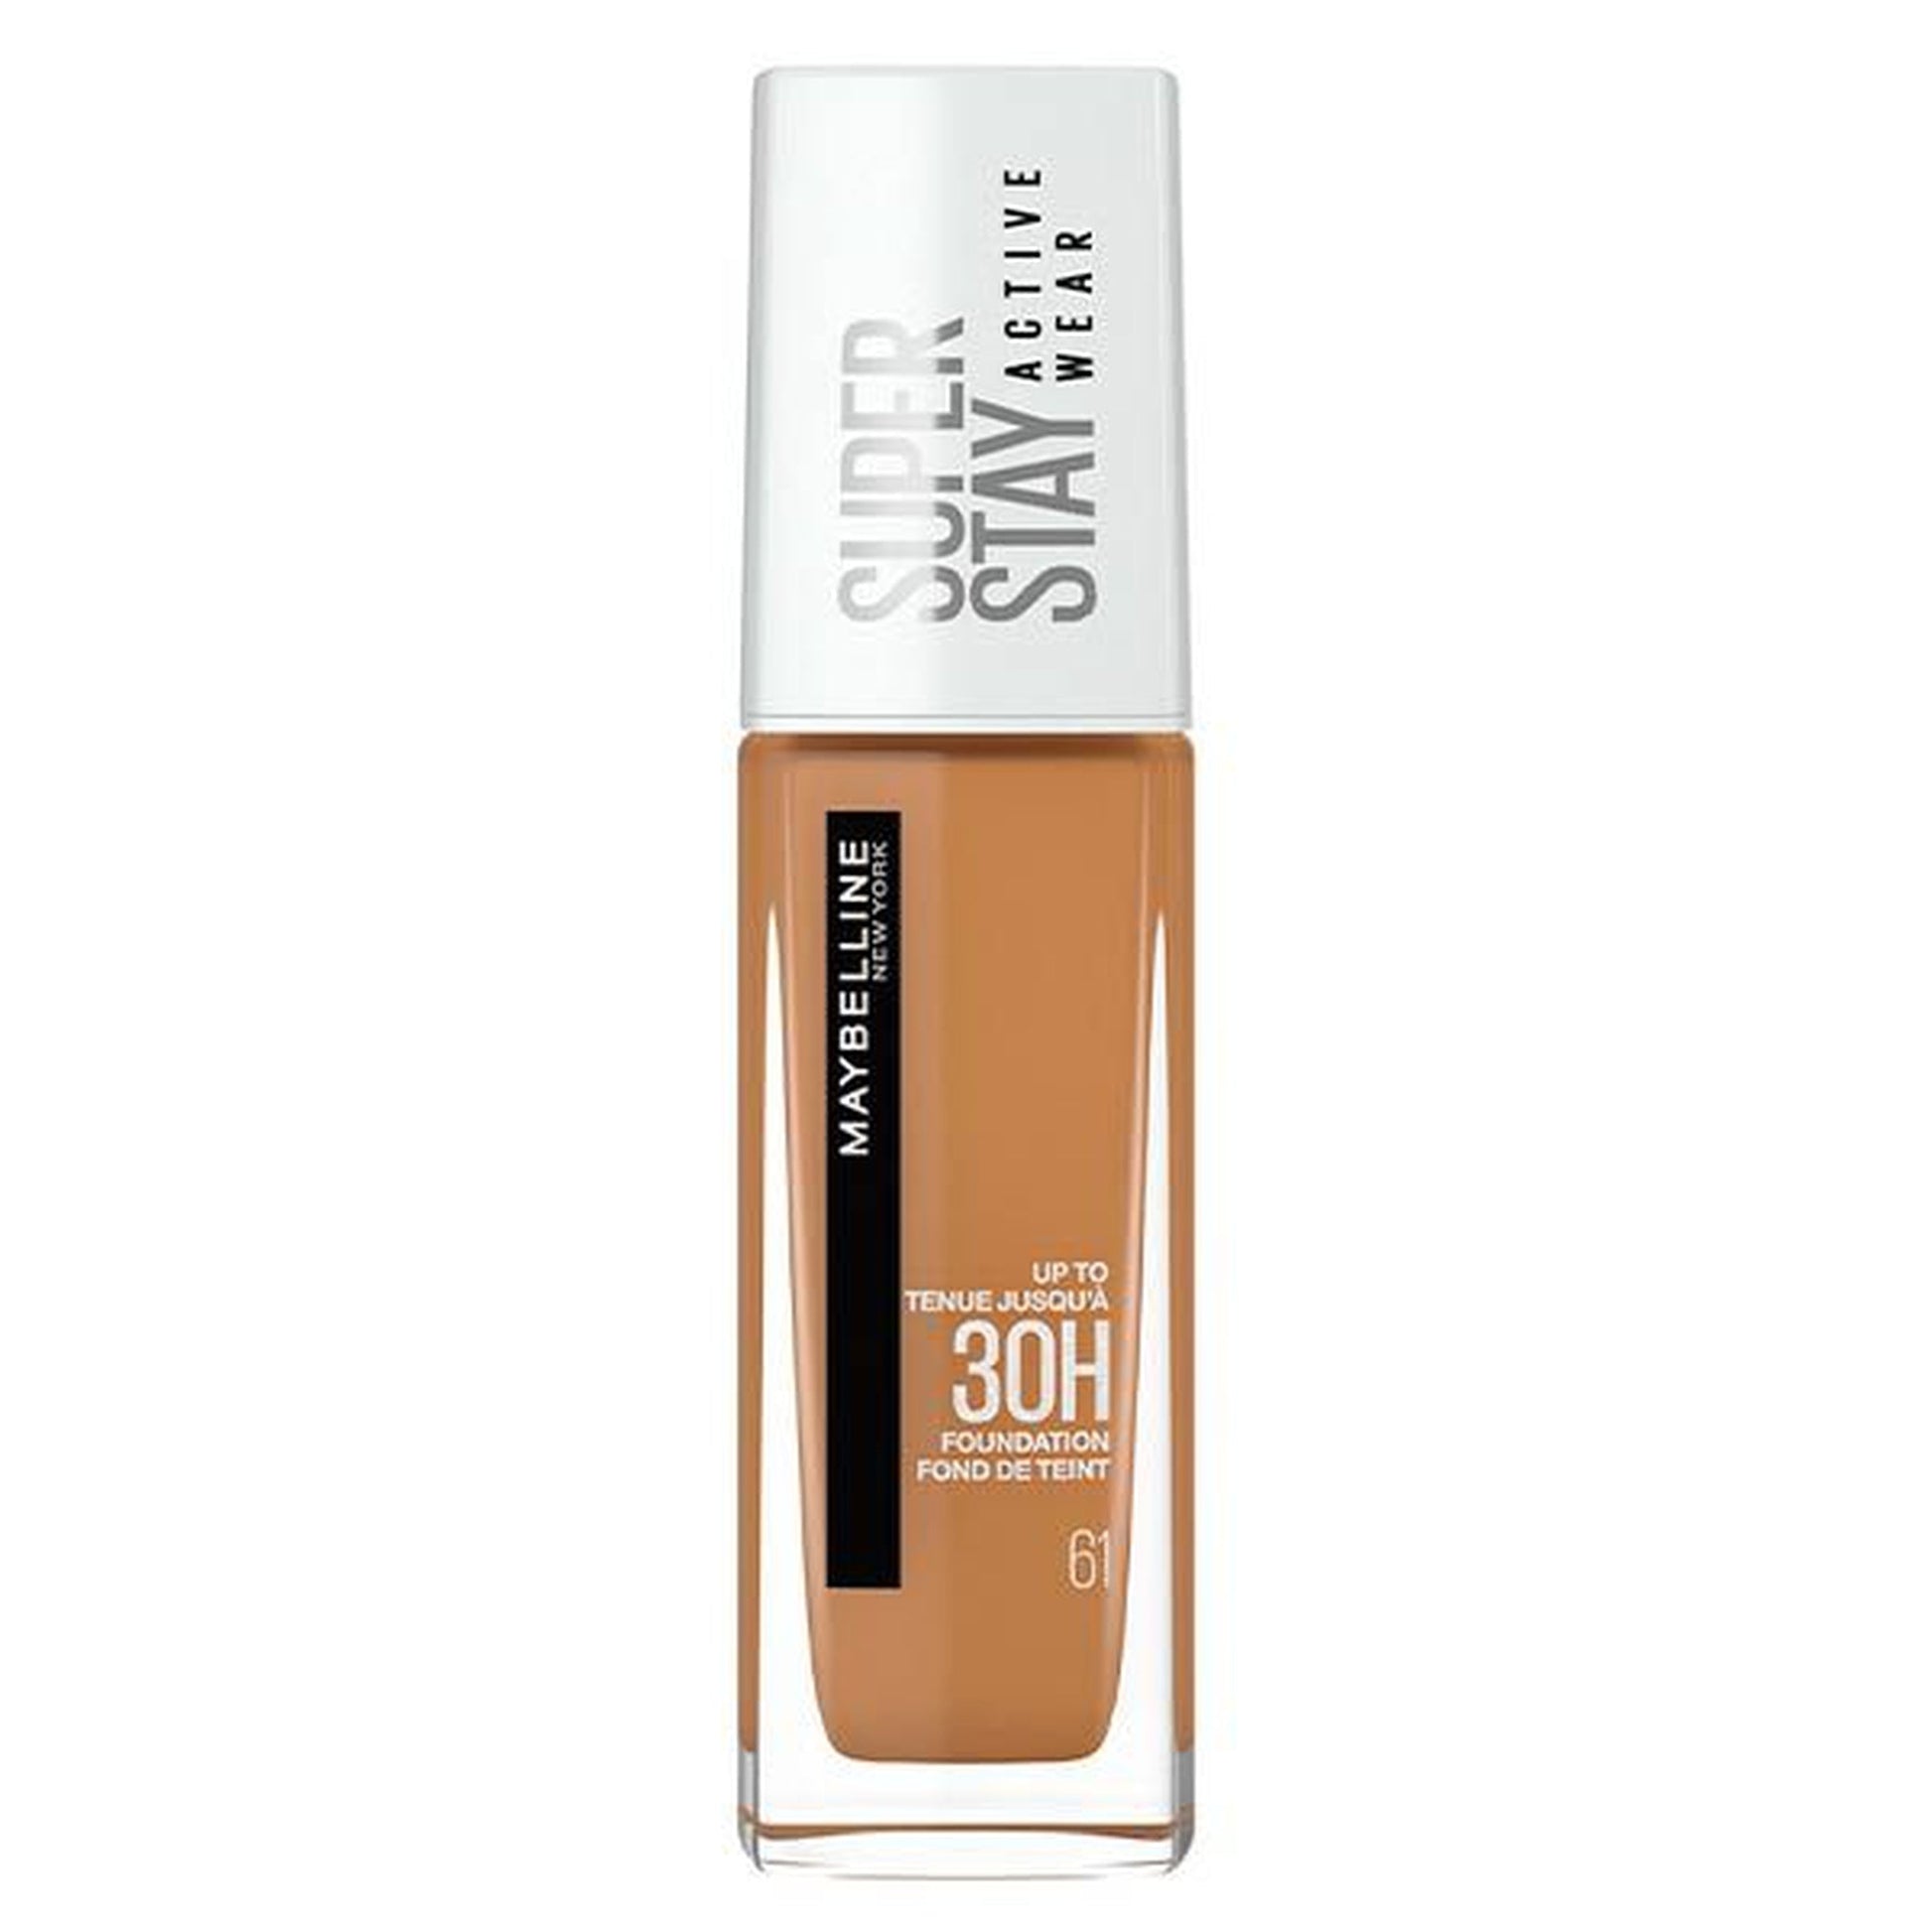 MAYBELLINE Super Stay Active Wear 30H Foundation, 61 Warm Bronze-Maybelline-BeautyNmakeup.co.uk